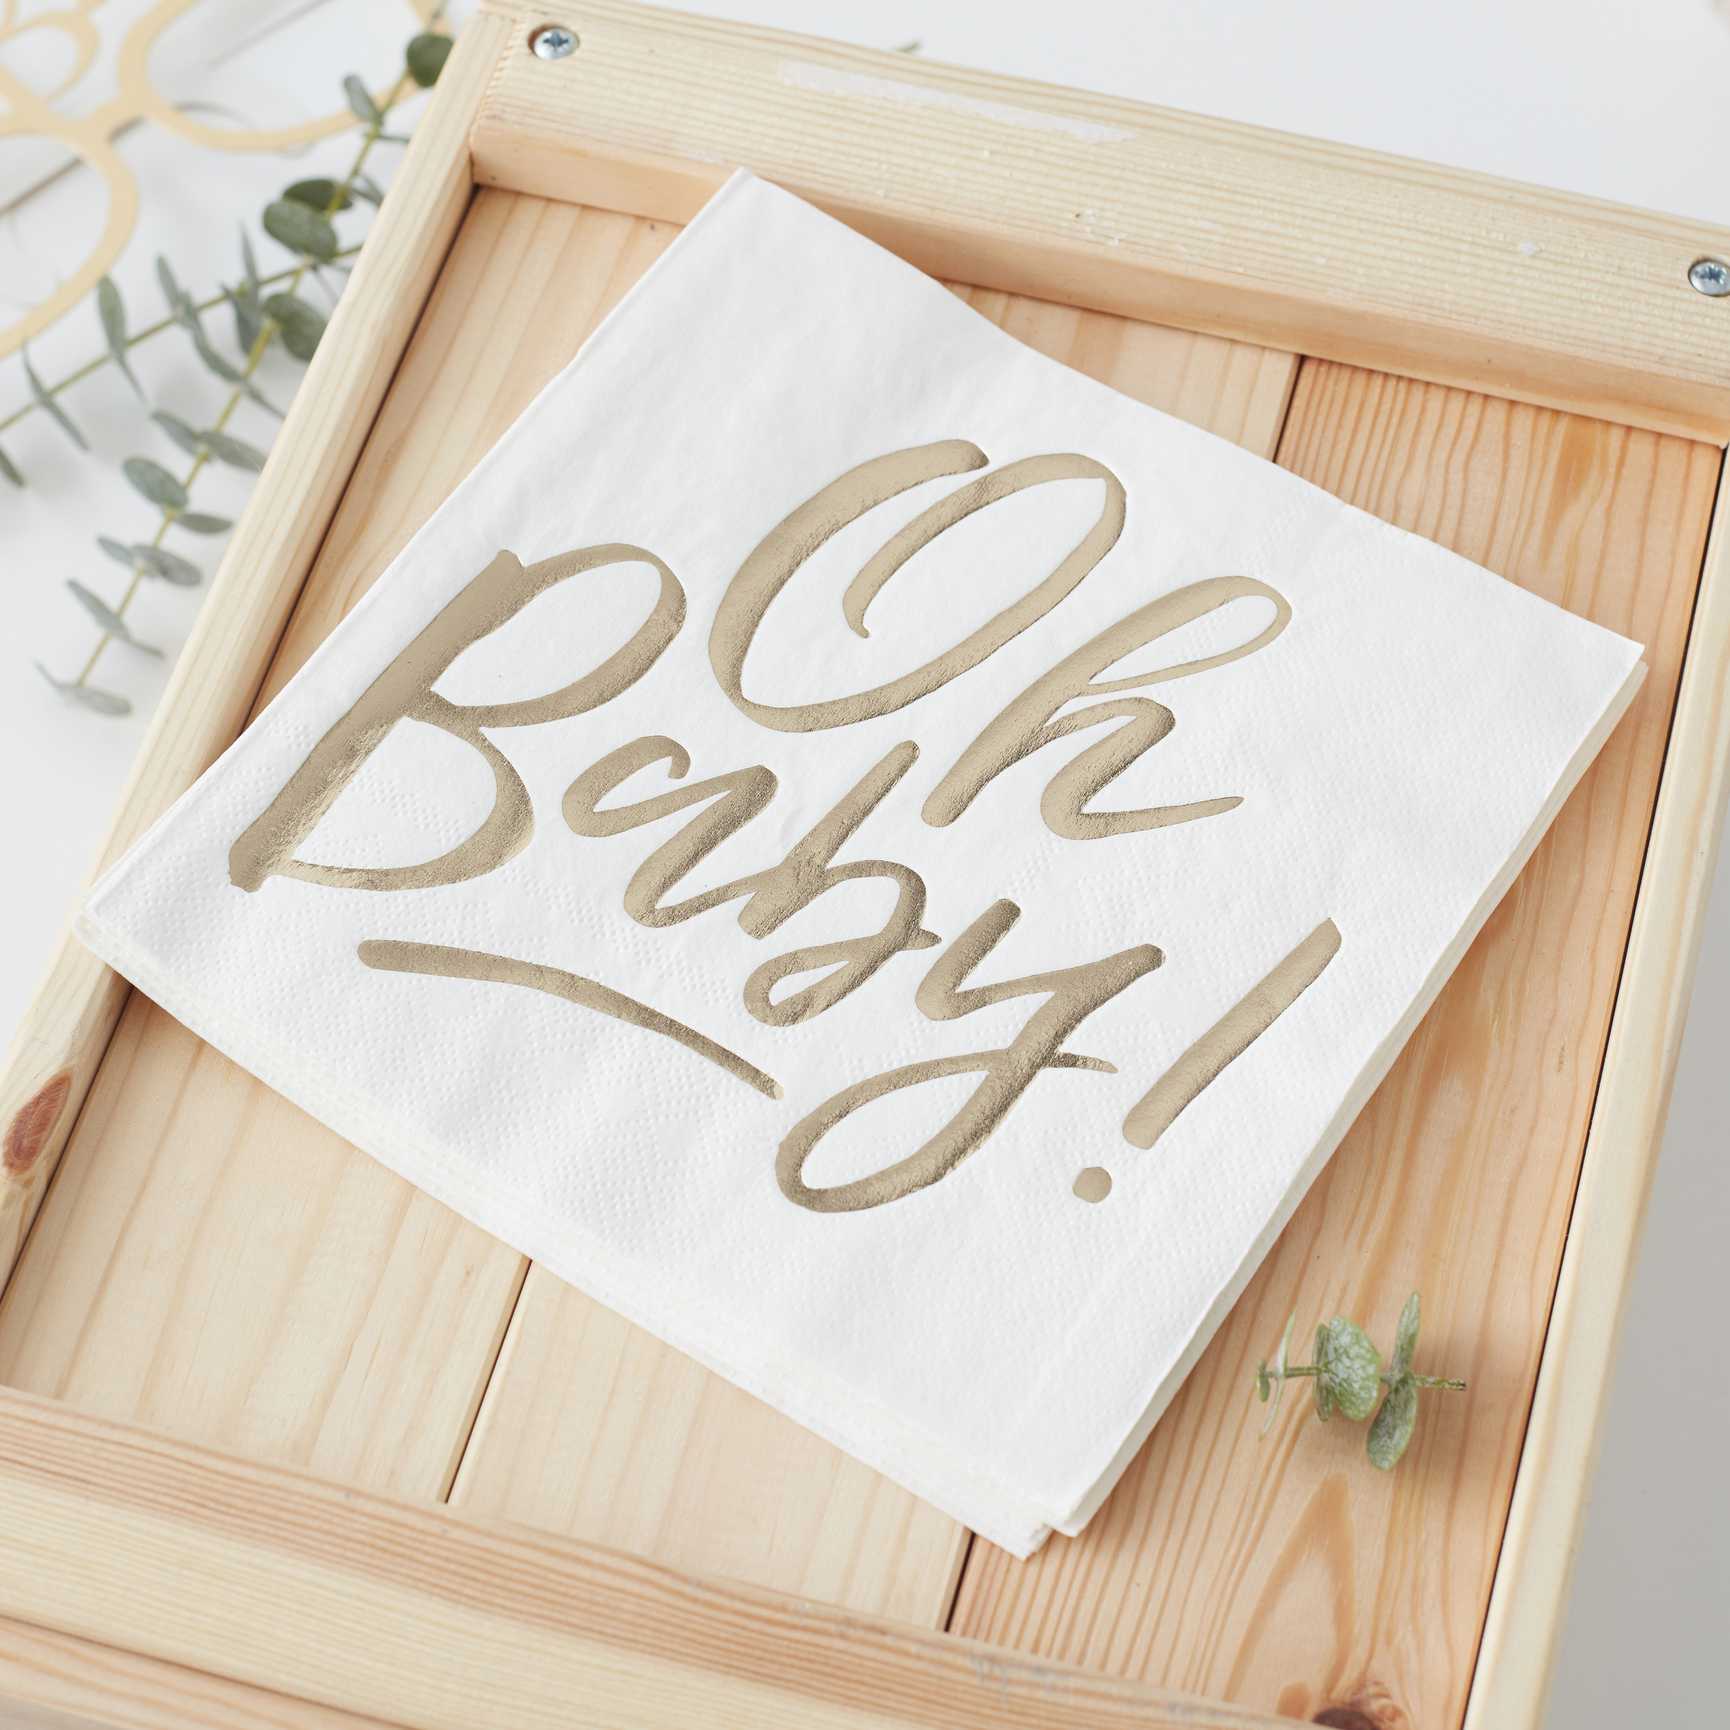 Papel napkins "Oh baby!" / Pack 16 units